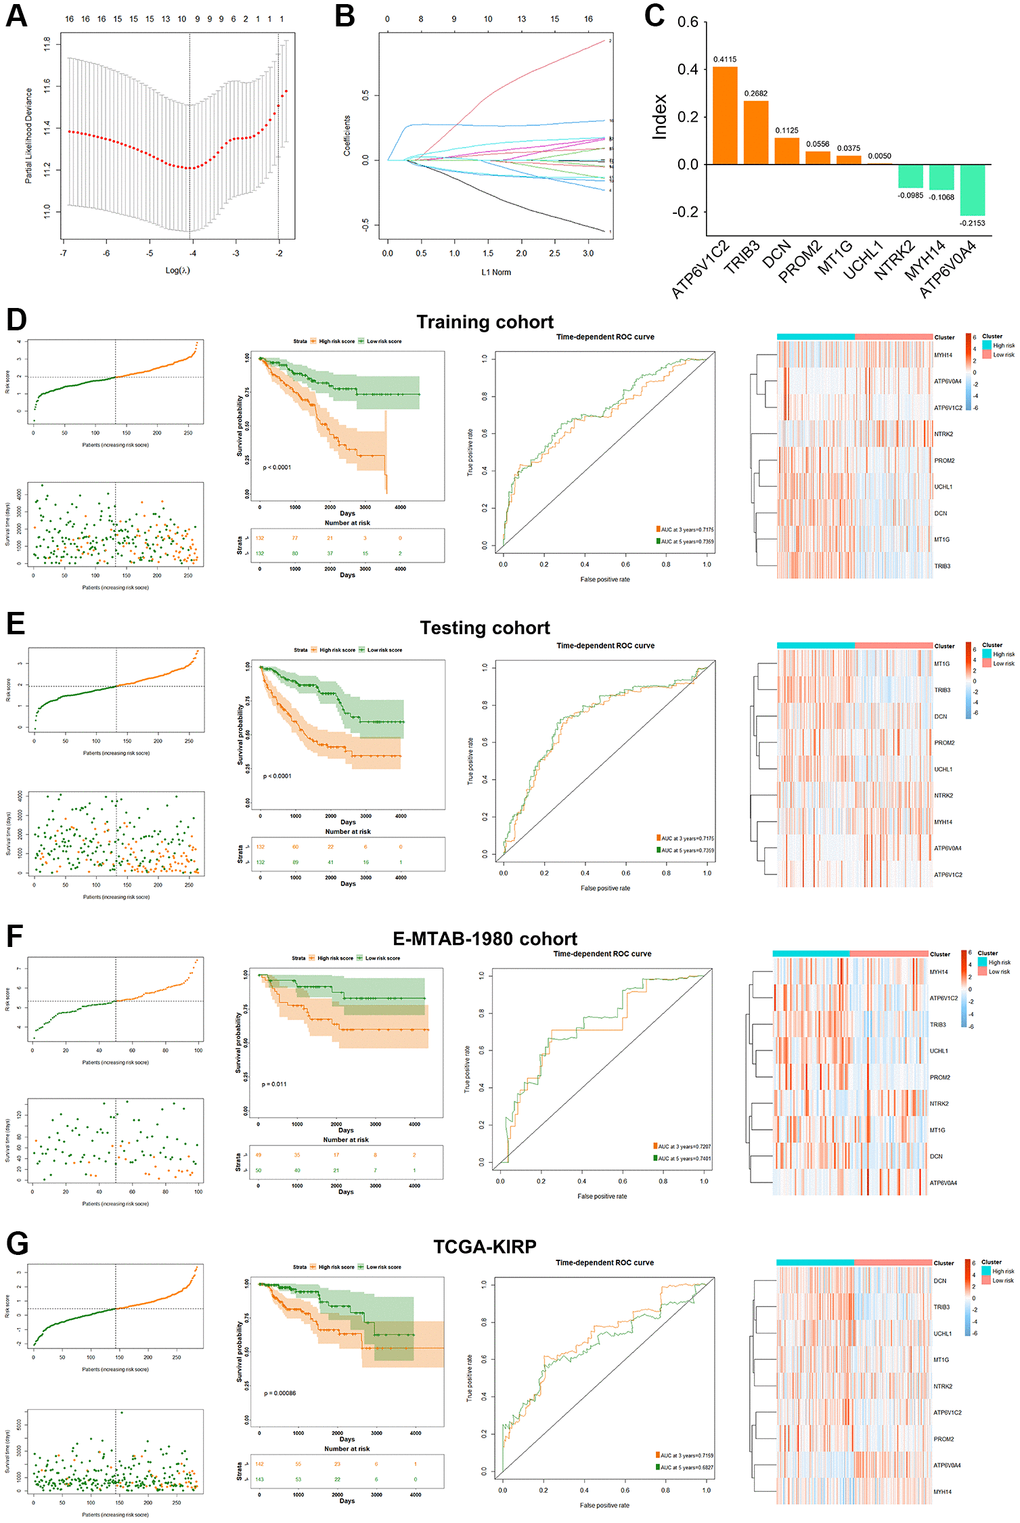 The identification and prognostic analyses of the PRPCDGs risk signature. (A, B) LASSO regression analyses of PRPCDGs in TCGA-KIRC training dataset. (C) Bar plot on LASSO regression coefficients of the PRPCDGs. (D) The display of risk score, OS and OS status; Kaplan–Meier curves of the high- or low-PRPCDGs-risk group; prognostic performance of PRPCDGs risk signature presented in time-dependent ROC curves; heatmap of PRPCDGs expression in these two risk groups in KIRC training dataset. (E–G) The same analyses in KIRC-testing cohort and the external validation datasets (E-MTAB-1980 and TCGA-KIRP).